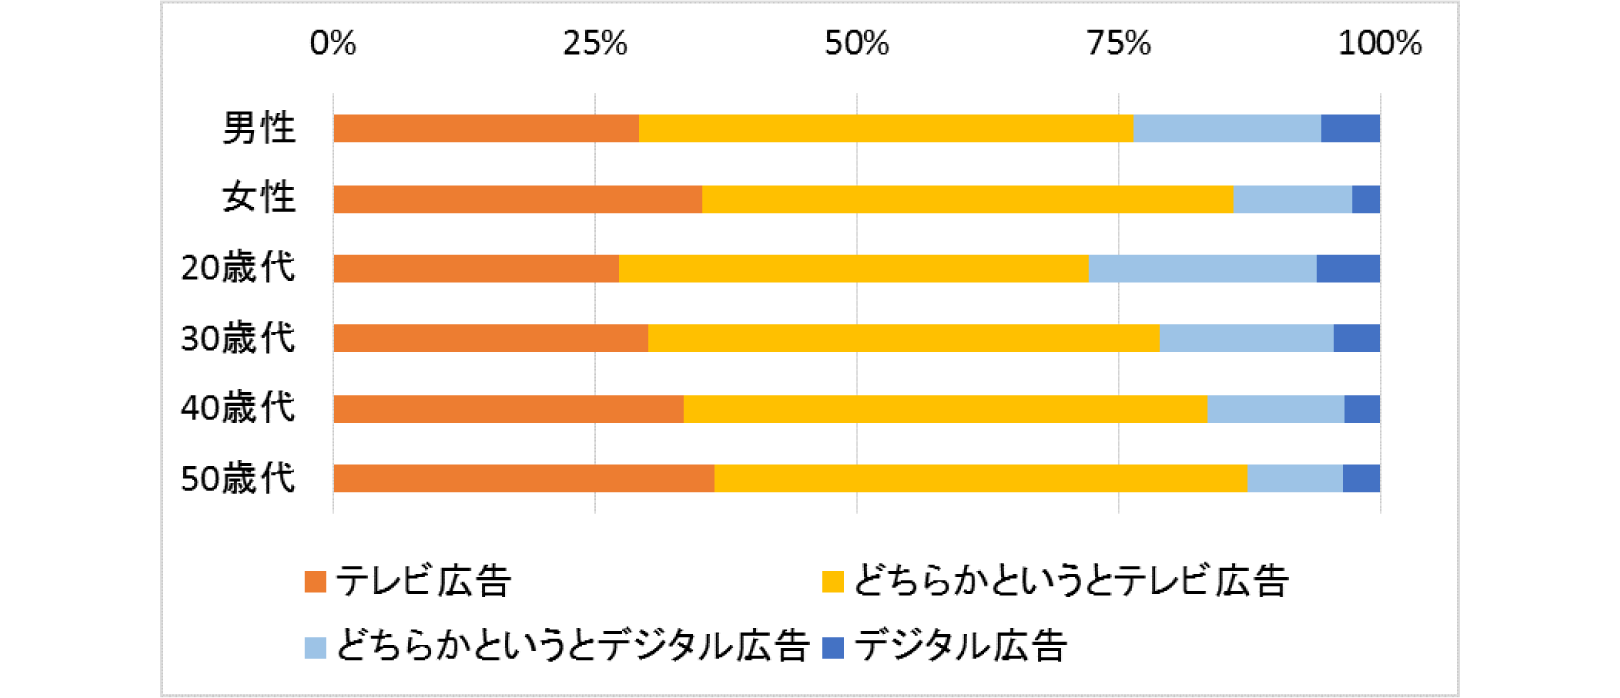 201809-19-fig-02.png